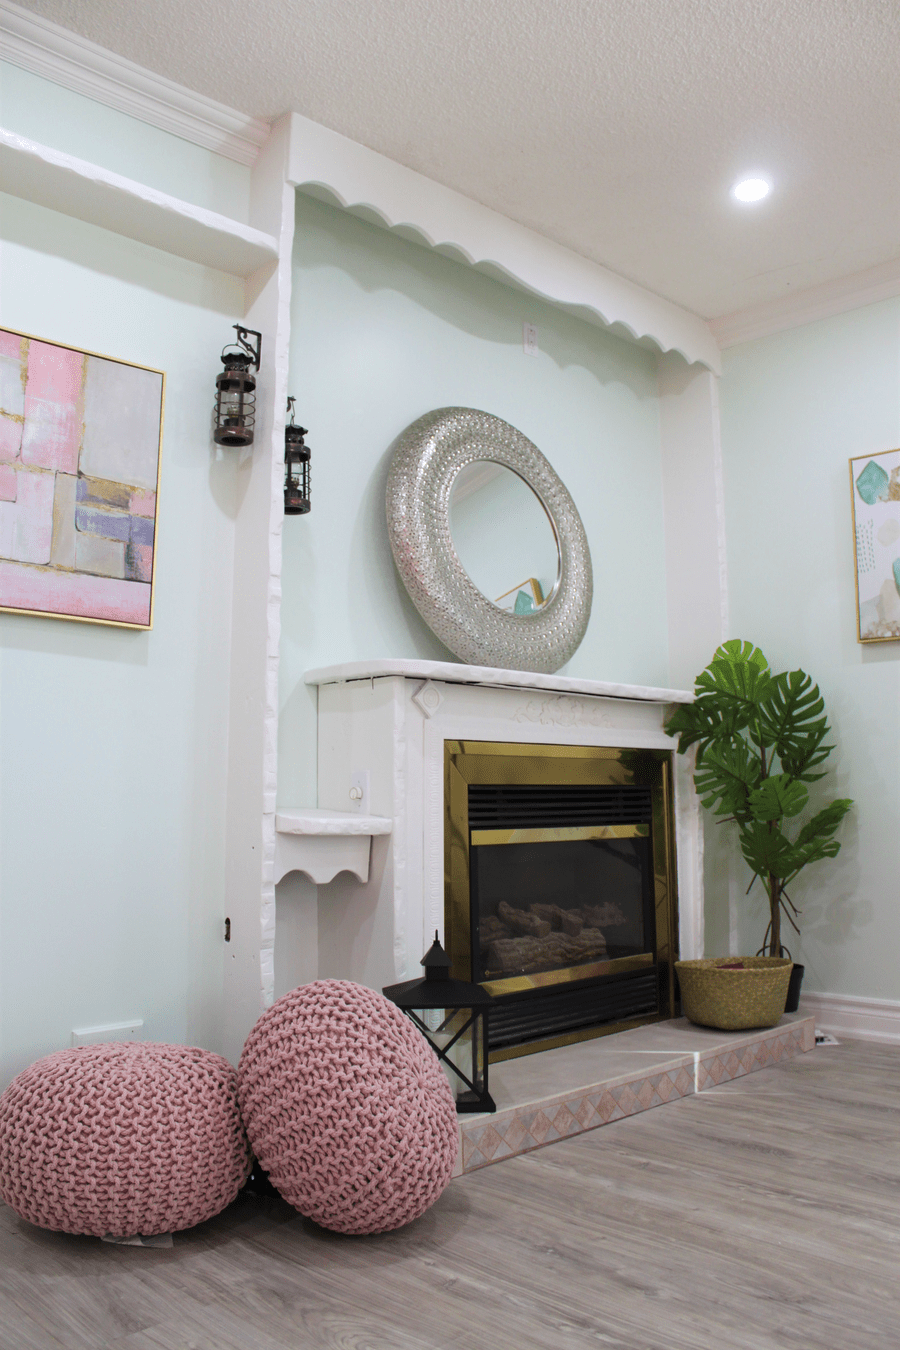 Lakeview Blvd Fireplace - After